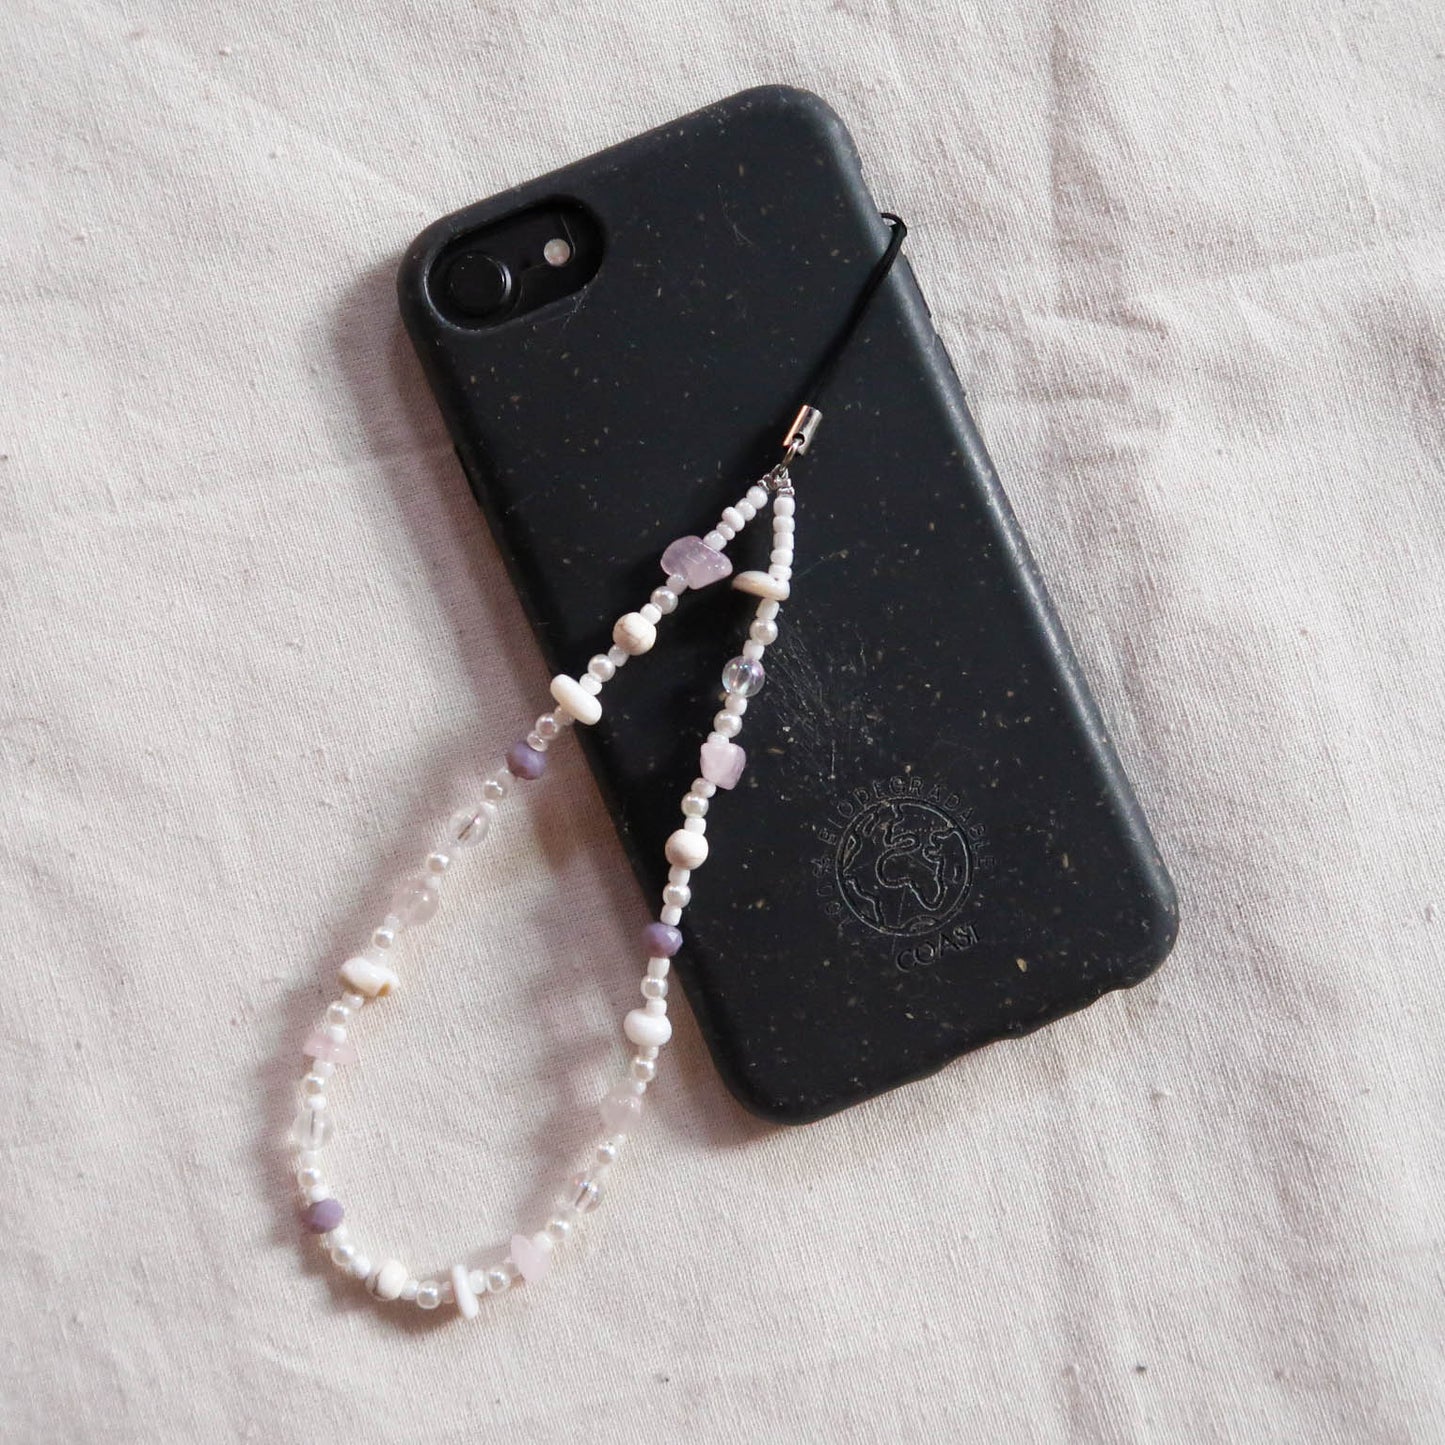 Cotton Candy Phone Strap